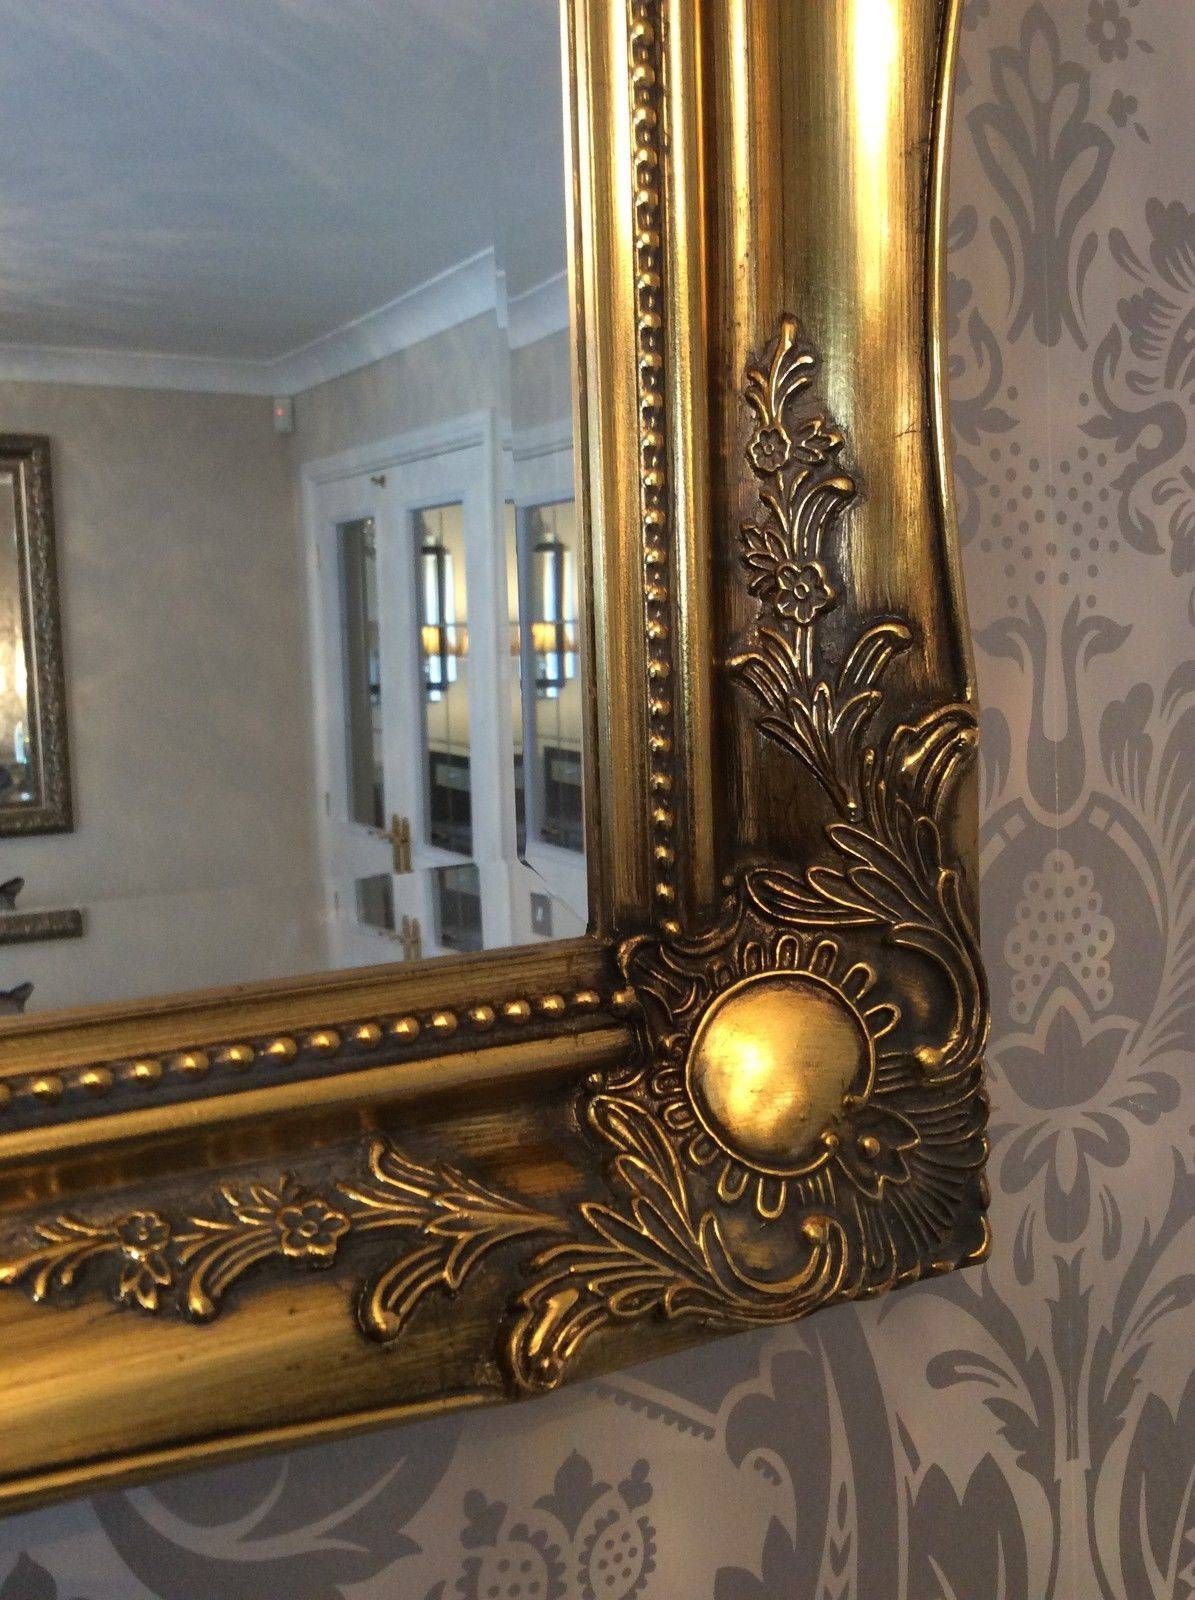 Antique Gold Shabby Chic Ornate Decorative Over Mantle Gilt Wall Intended For Shabby Chic Gold Mirrors (View 9 of 15)